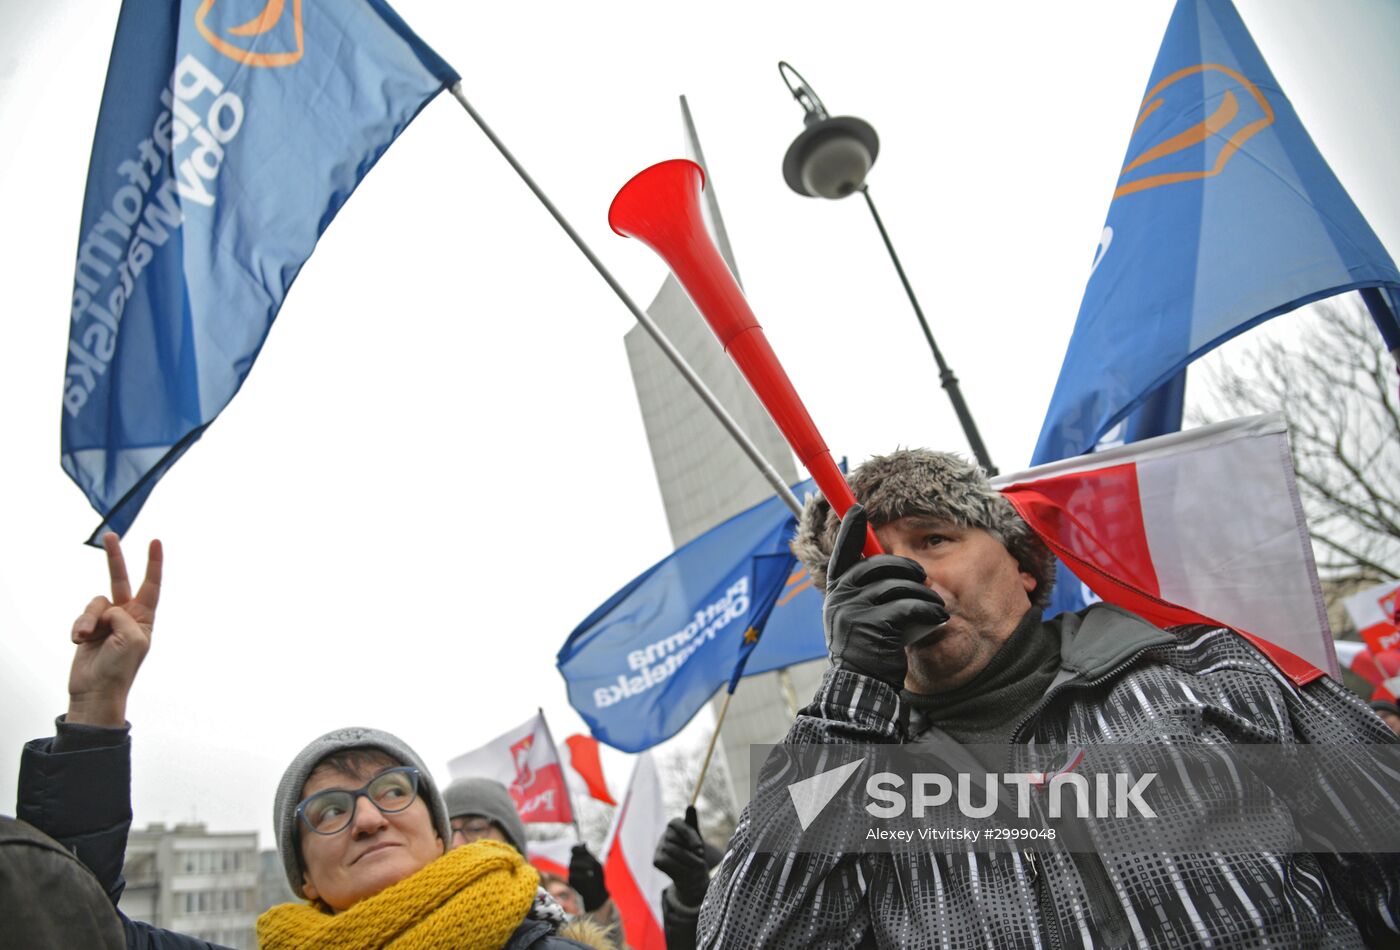 Antigovernment rally in Warsaw